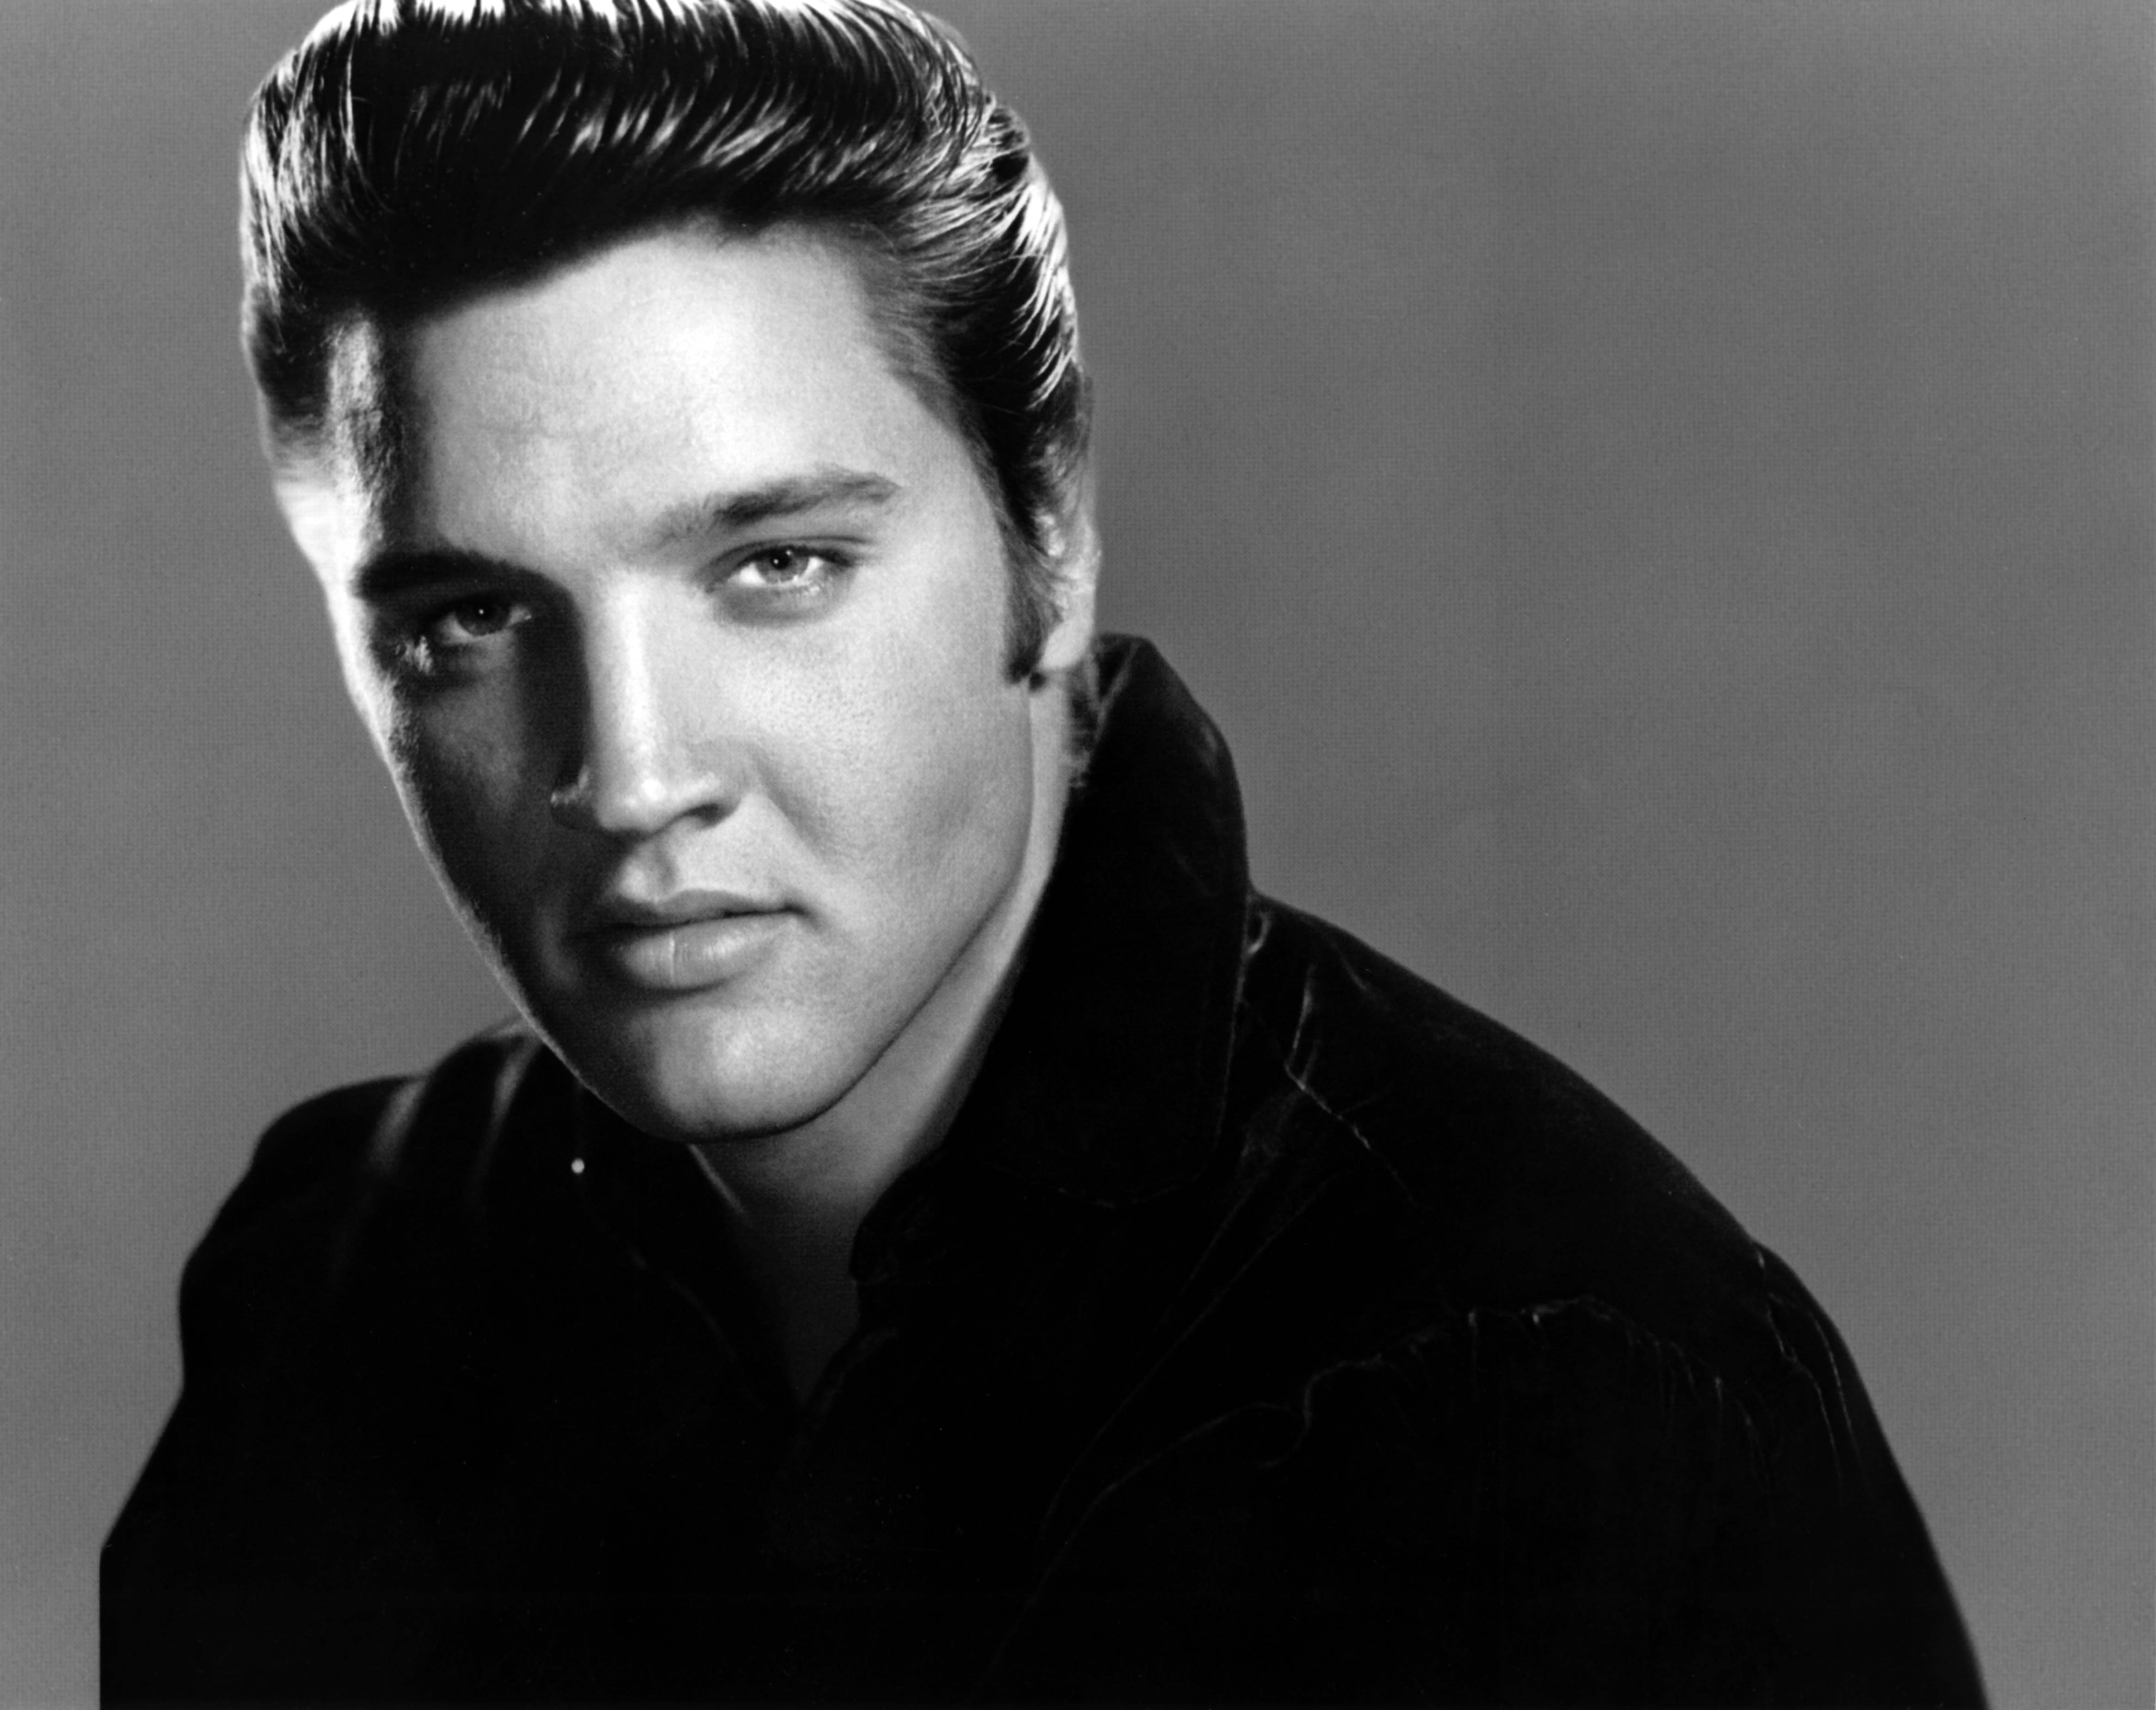 How Many People Claim to be the Child of Elvis Presley?